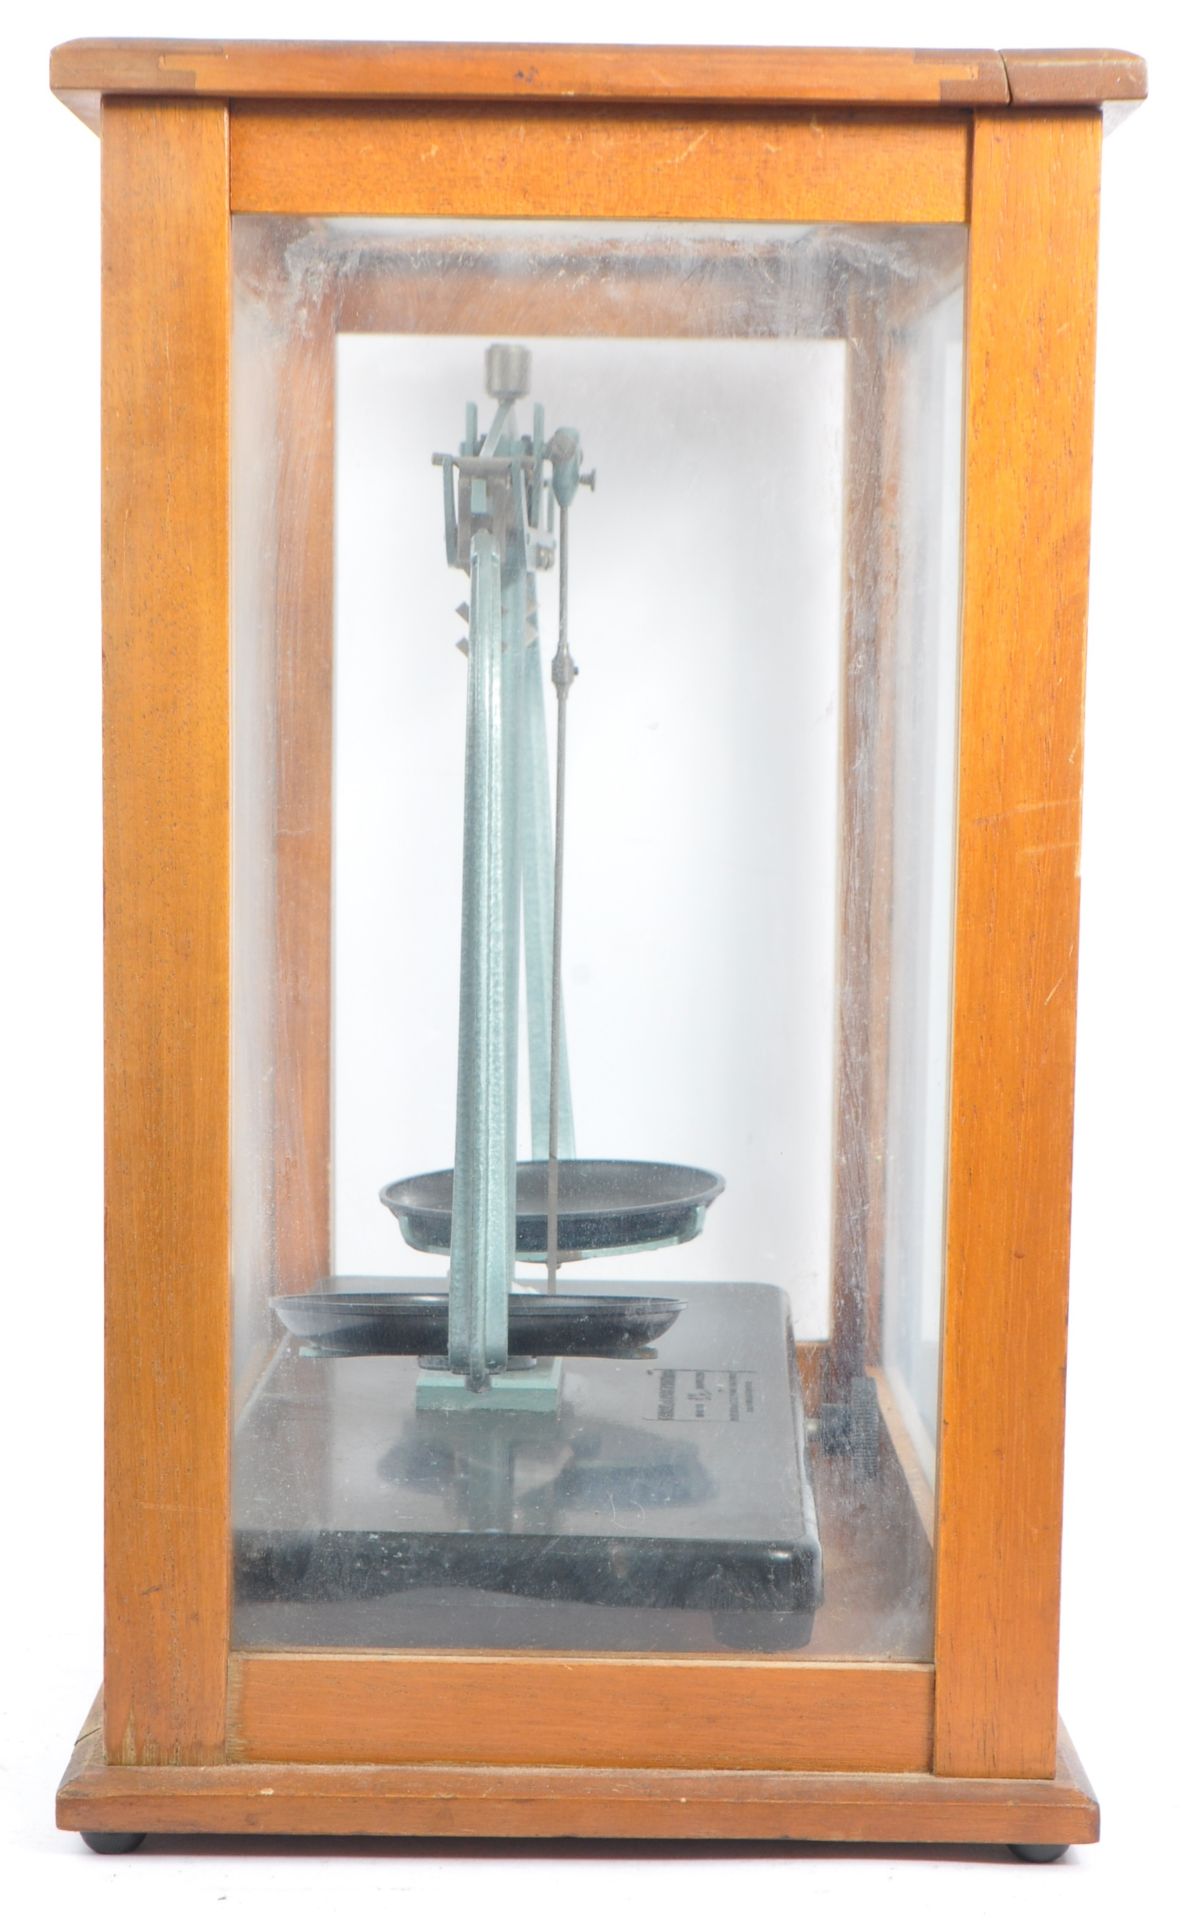 GRIFFIN & GEORGE OAK CASED SCIENTIFIC BALANCE SCALES - Image 5 of 7